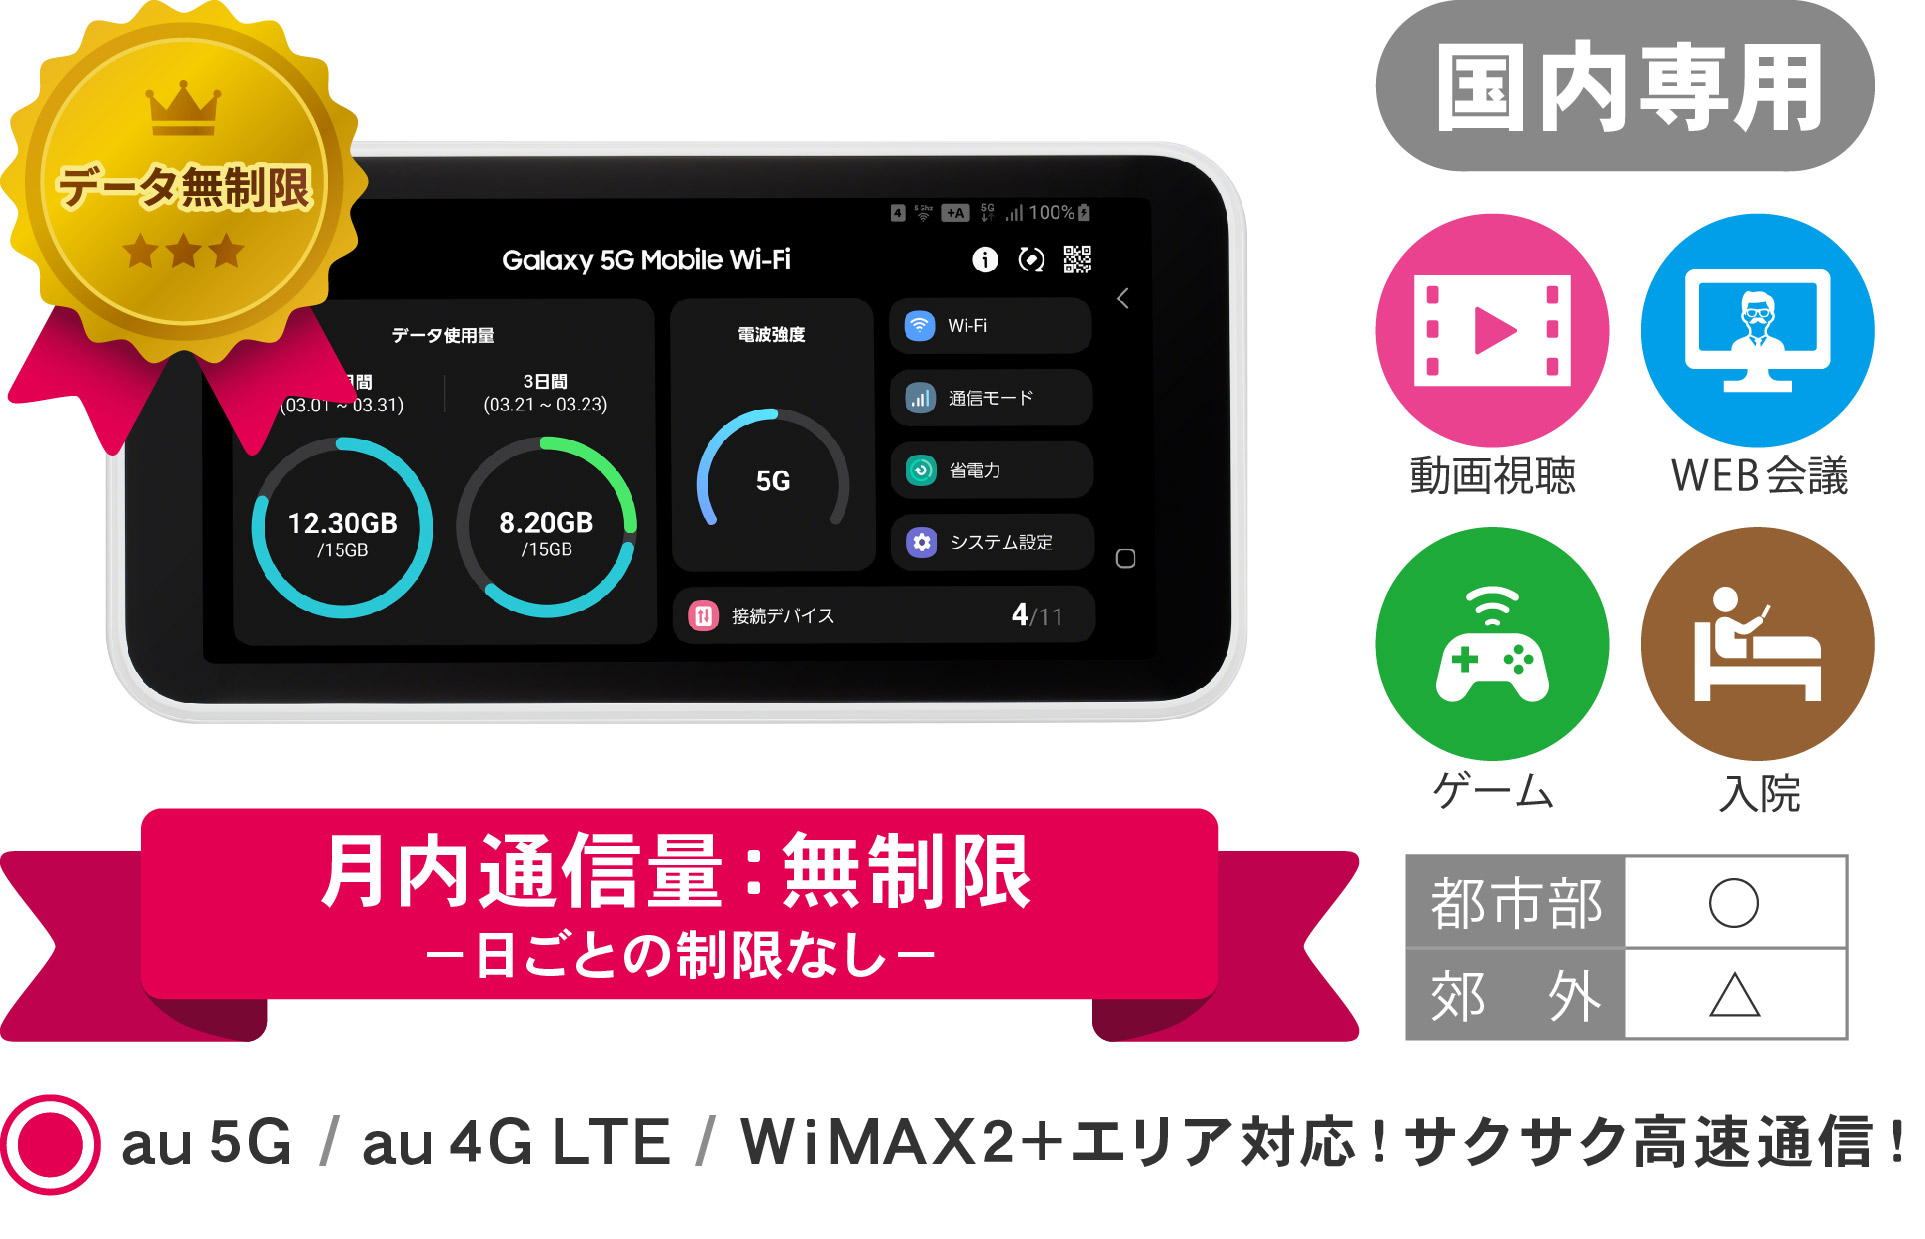 wimax_5g_manthly_sale